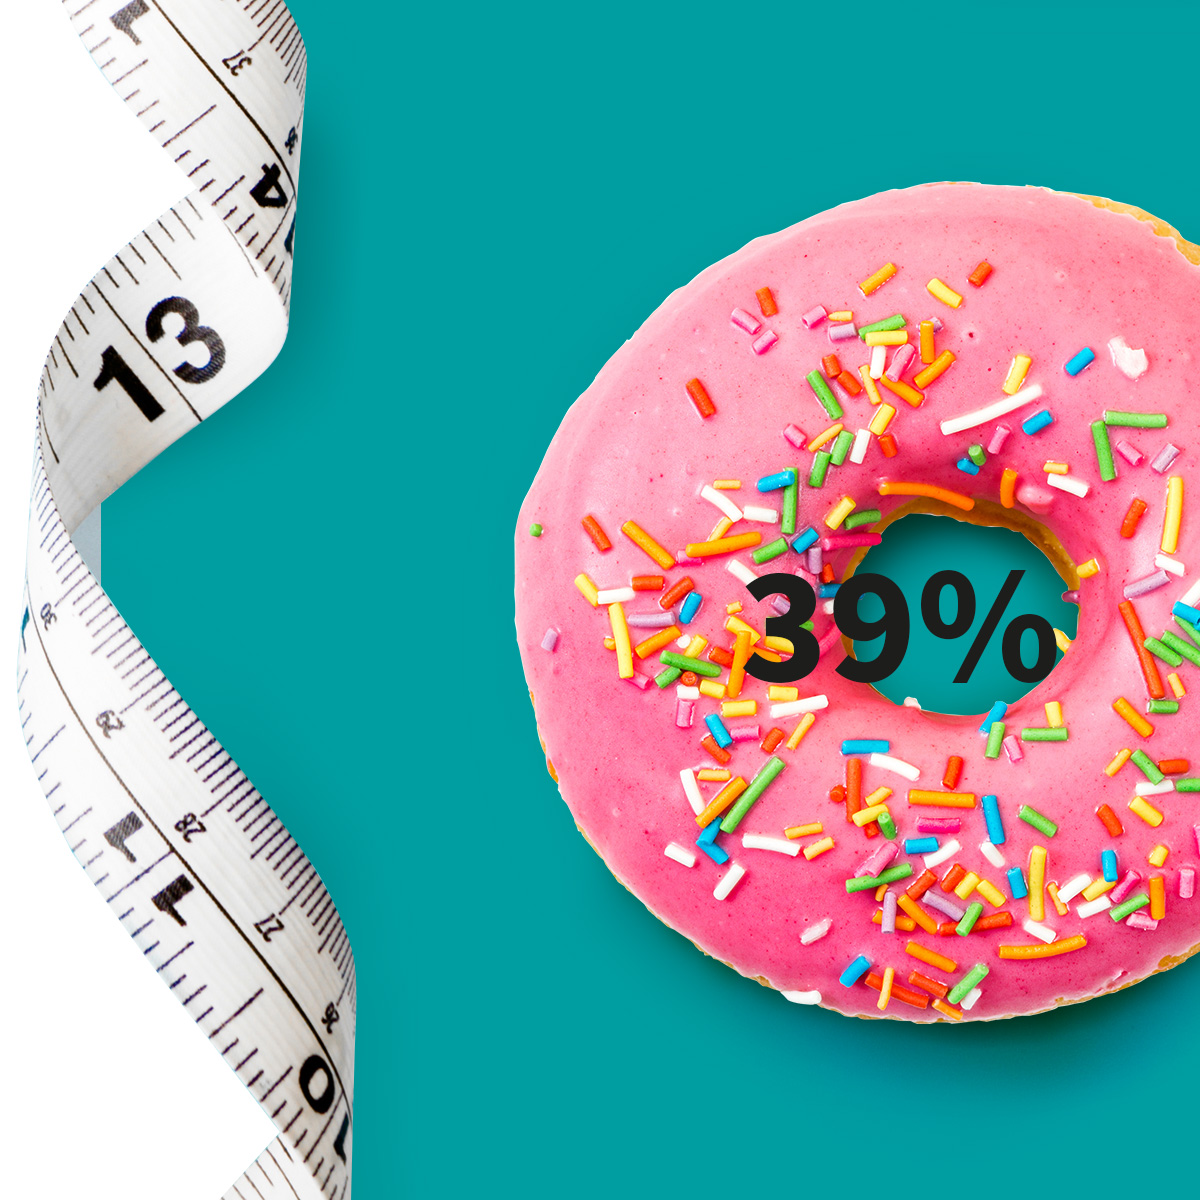 [.DE-de Germany (german)] •	A measuring tape and a doughnut with pink icing and colourful sugar sprinkle as a metaphor for obesity